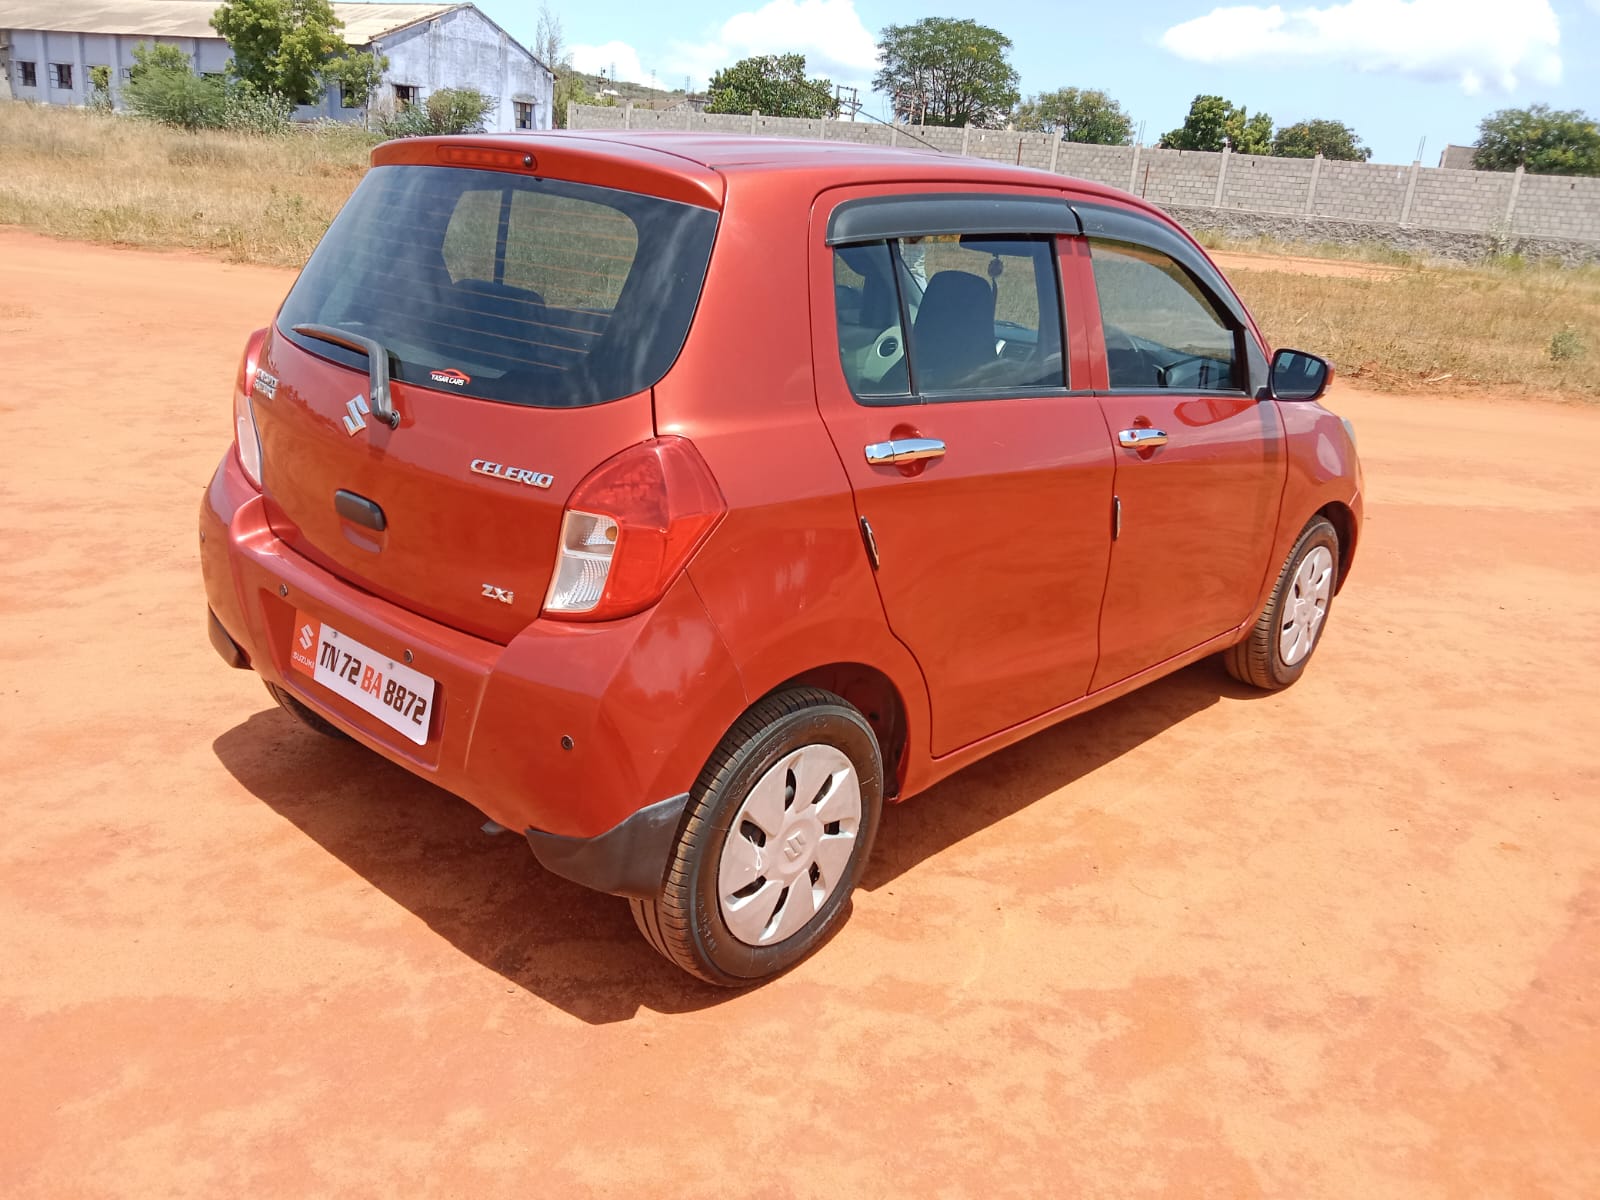 3699-for-sale-Maruthi-Suzuki-Celerio-Petrol-Second-Owner-2015-TN-registered-rs-0